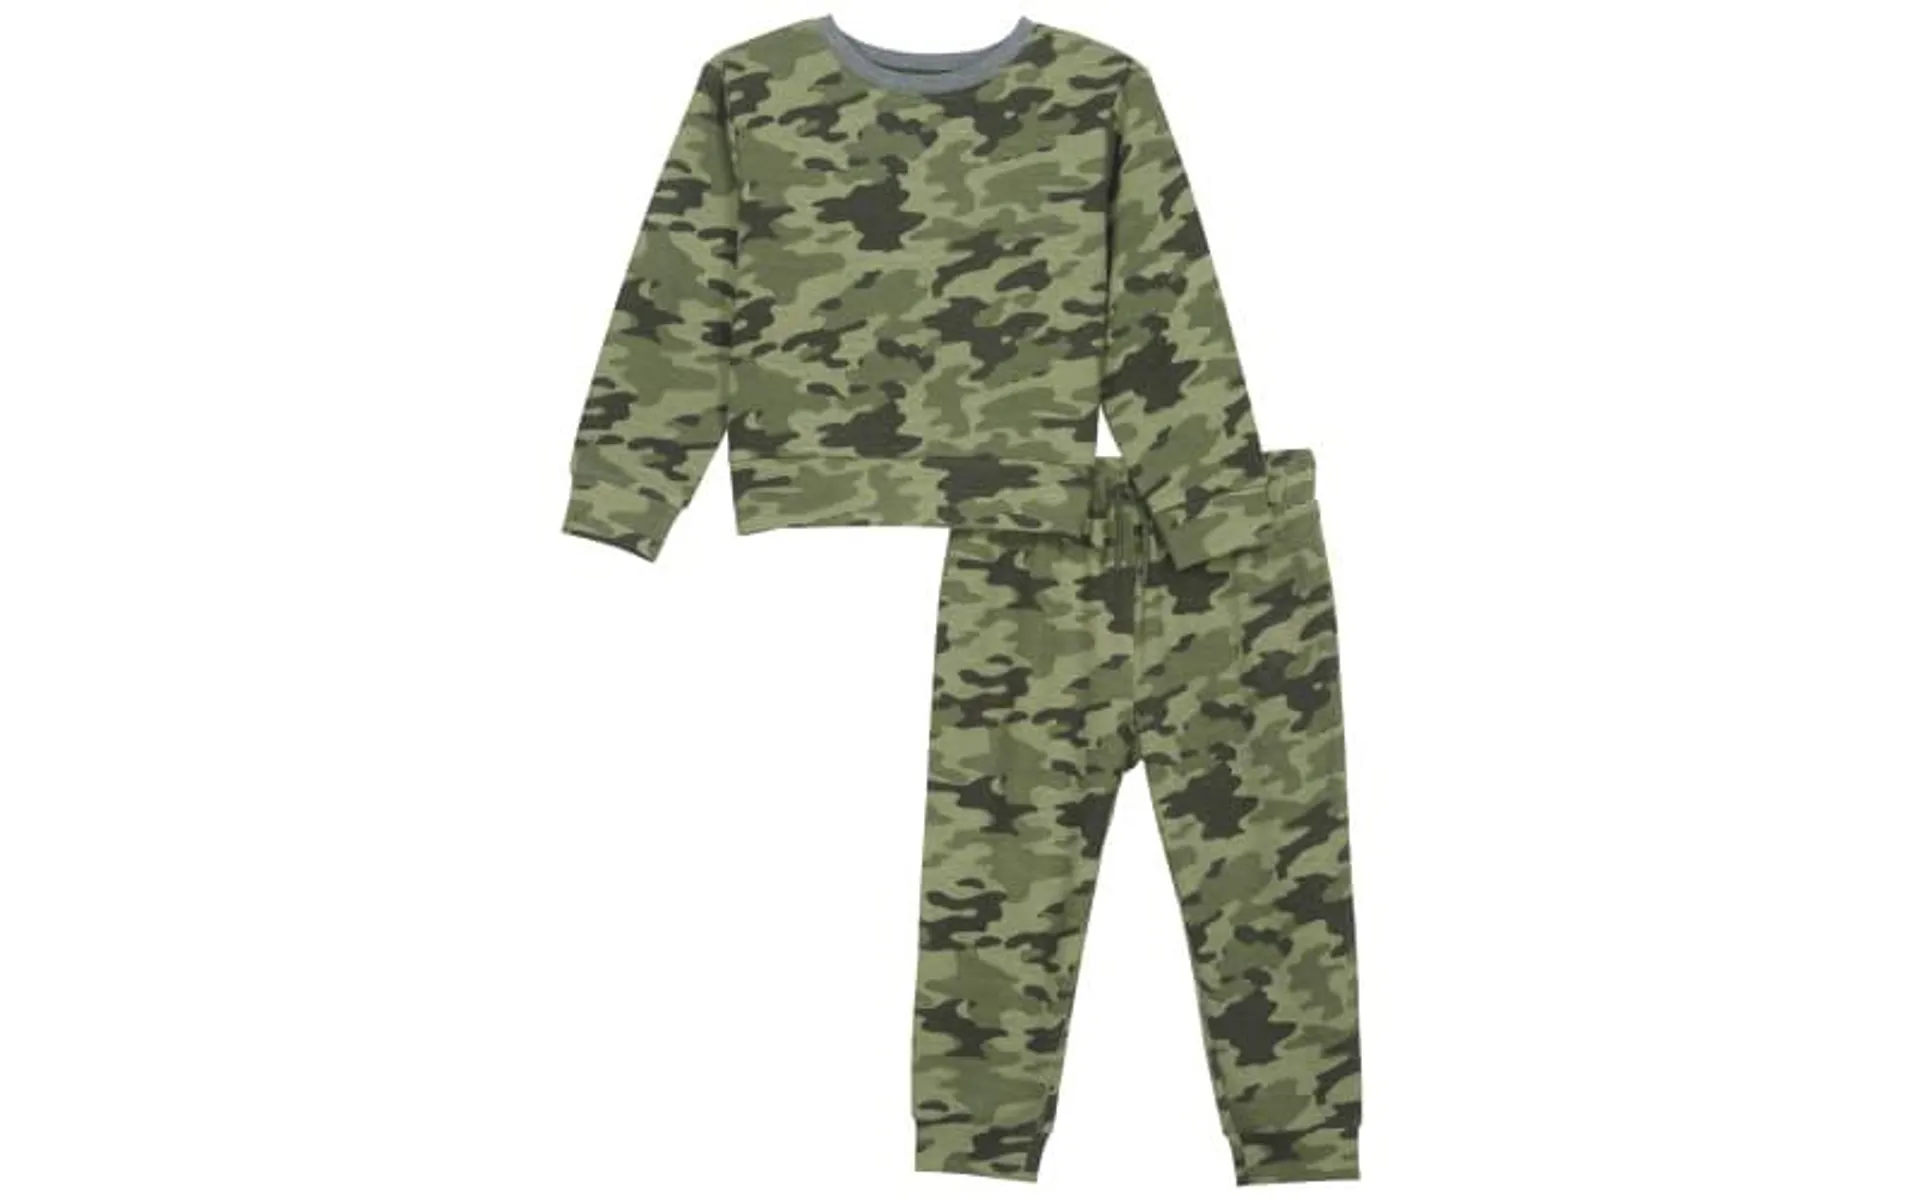 Outdoor Kids Long-Sleeve Shirt and Jogger Pants Lounge Set for Babies or Toddlers